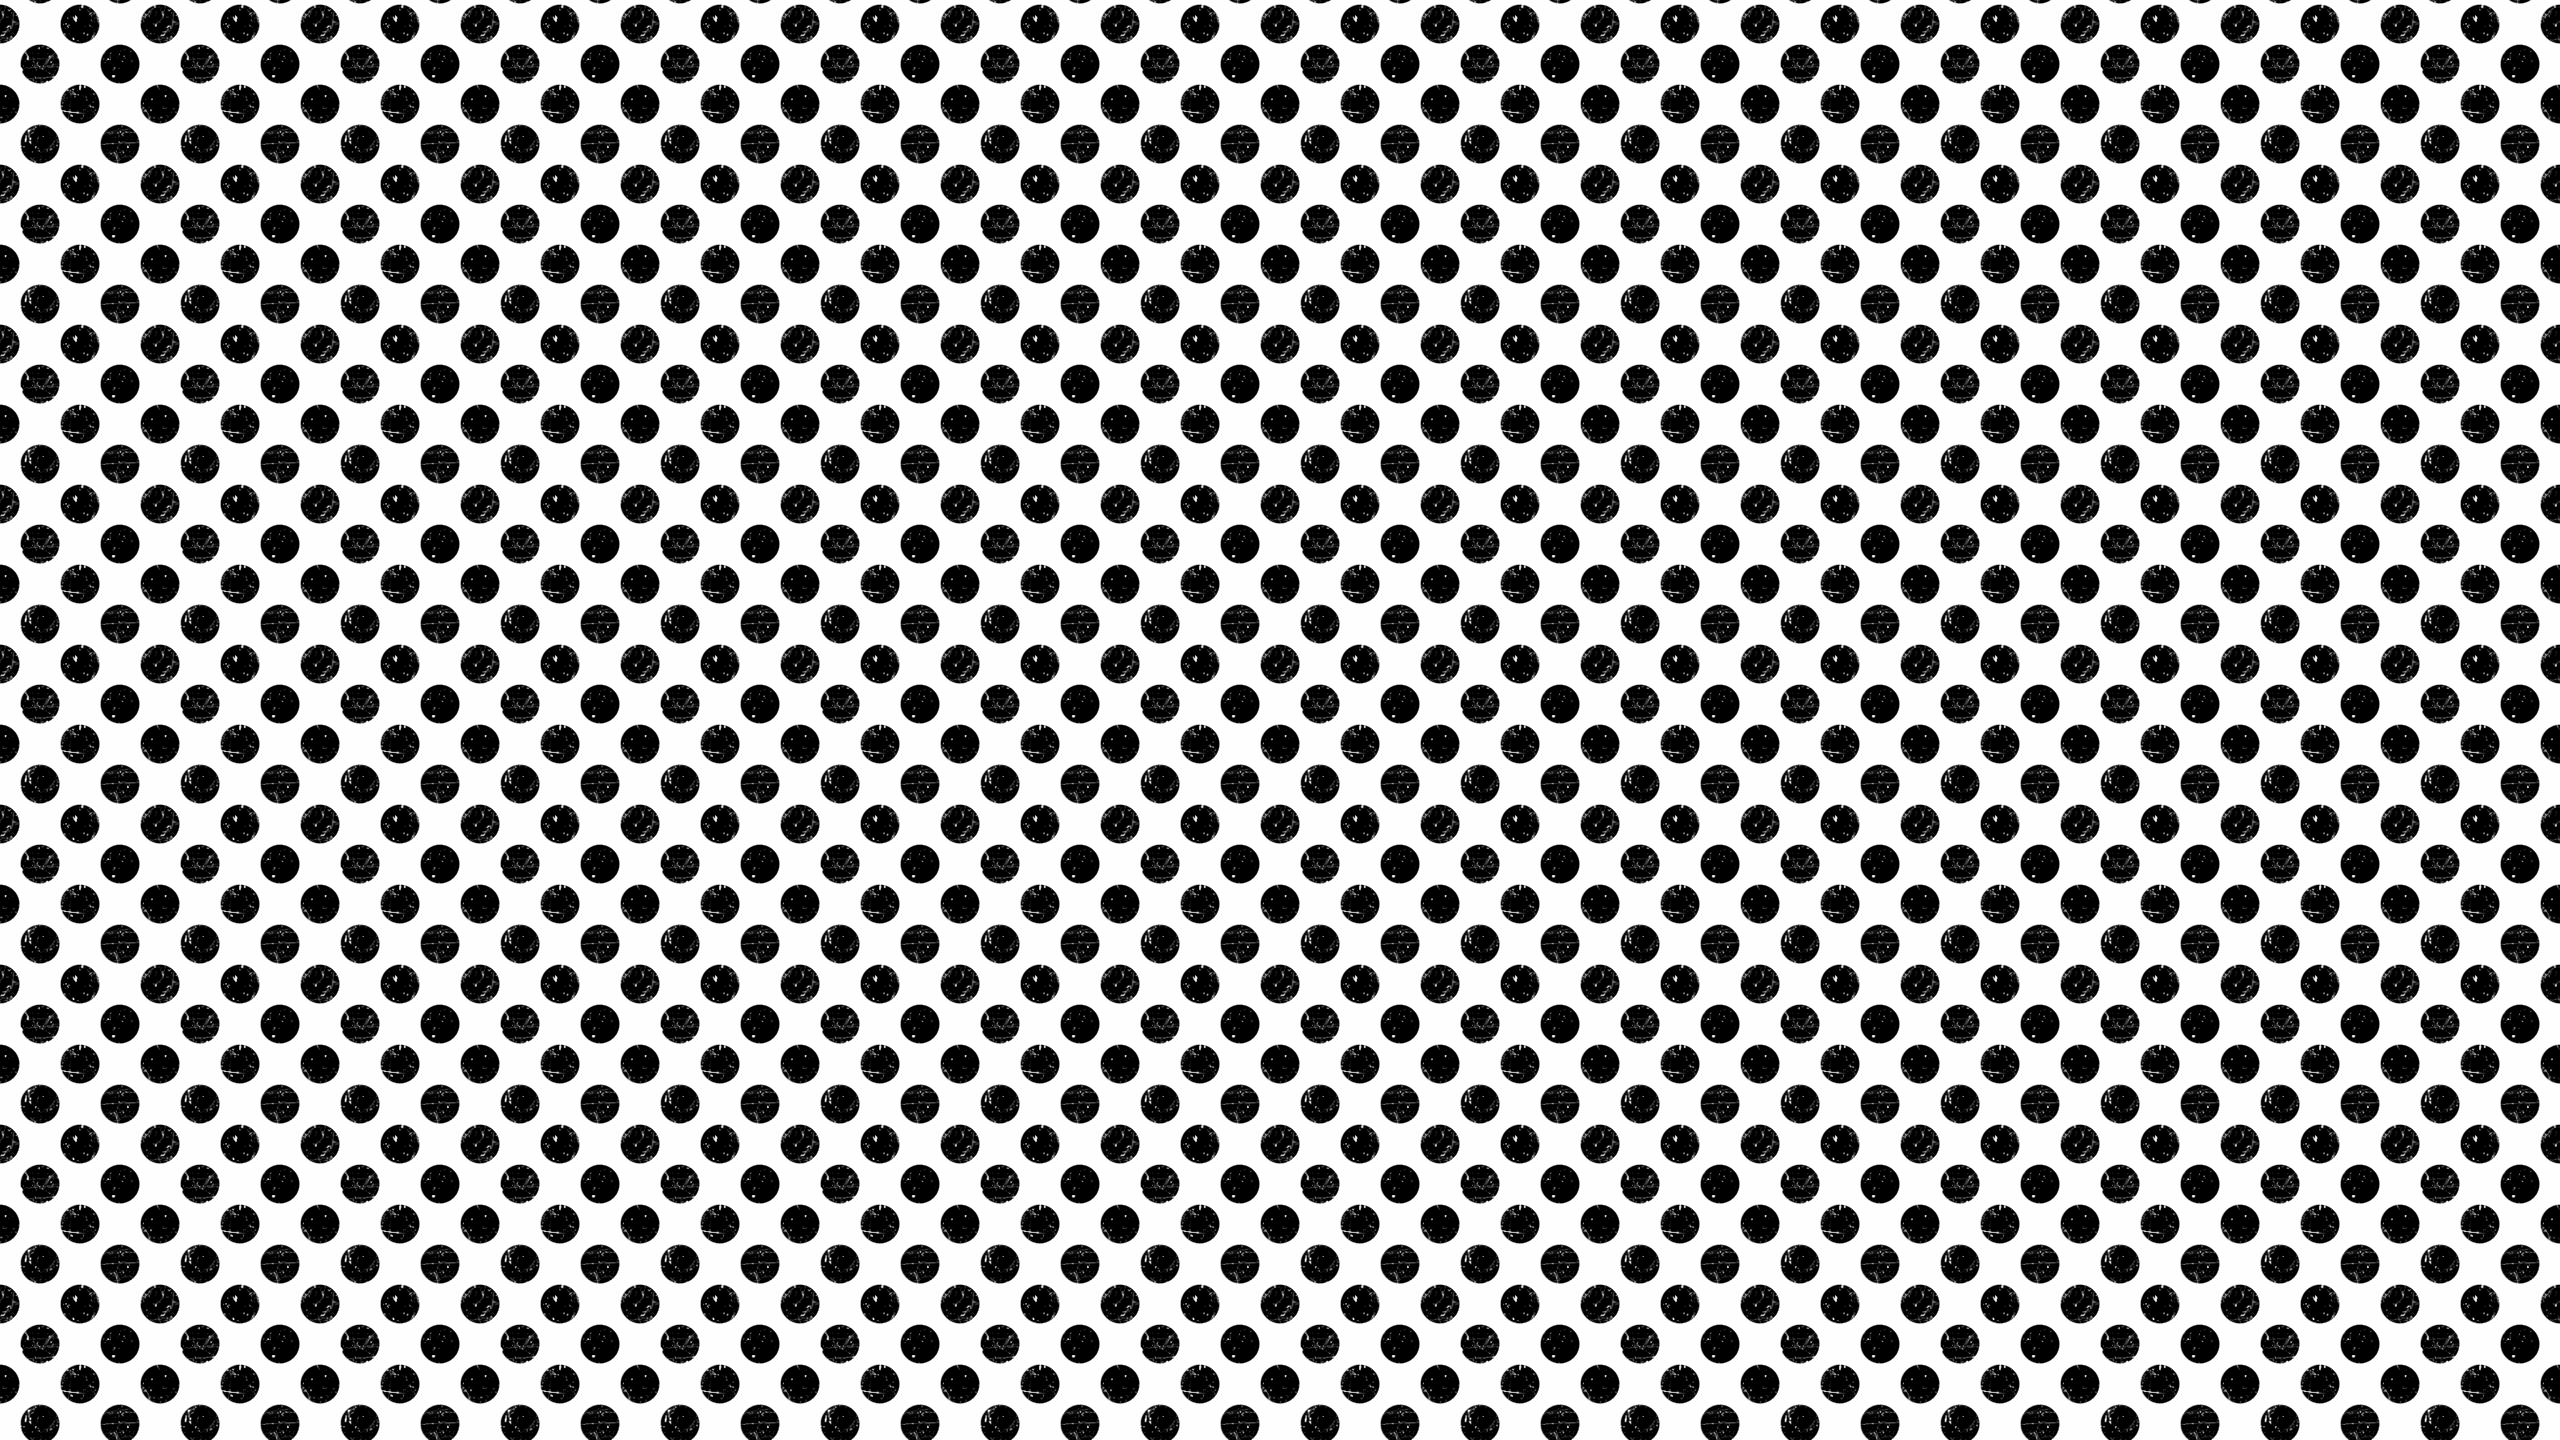 Trance Polka Dots Desktop Wallpaper Is Easy Just Save The